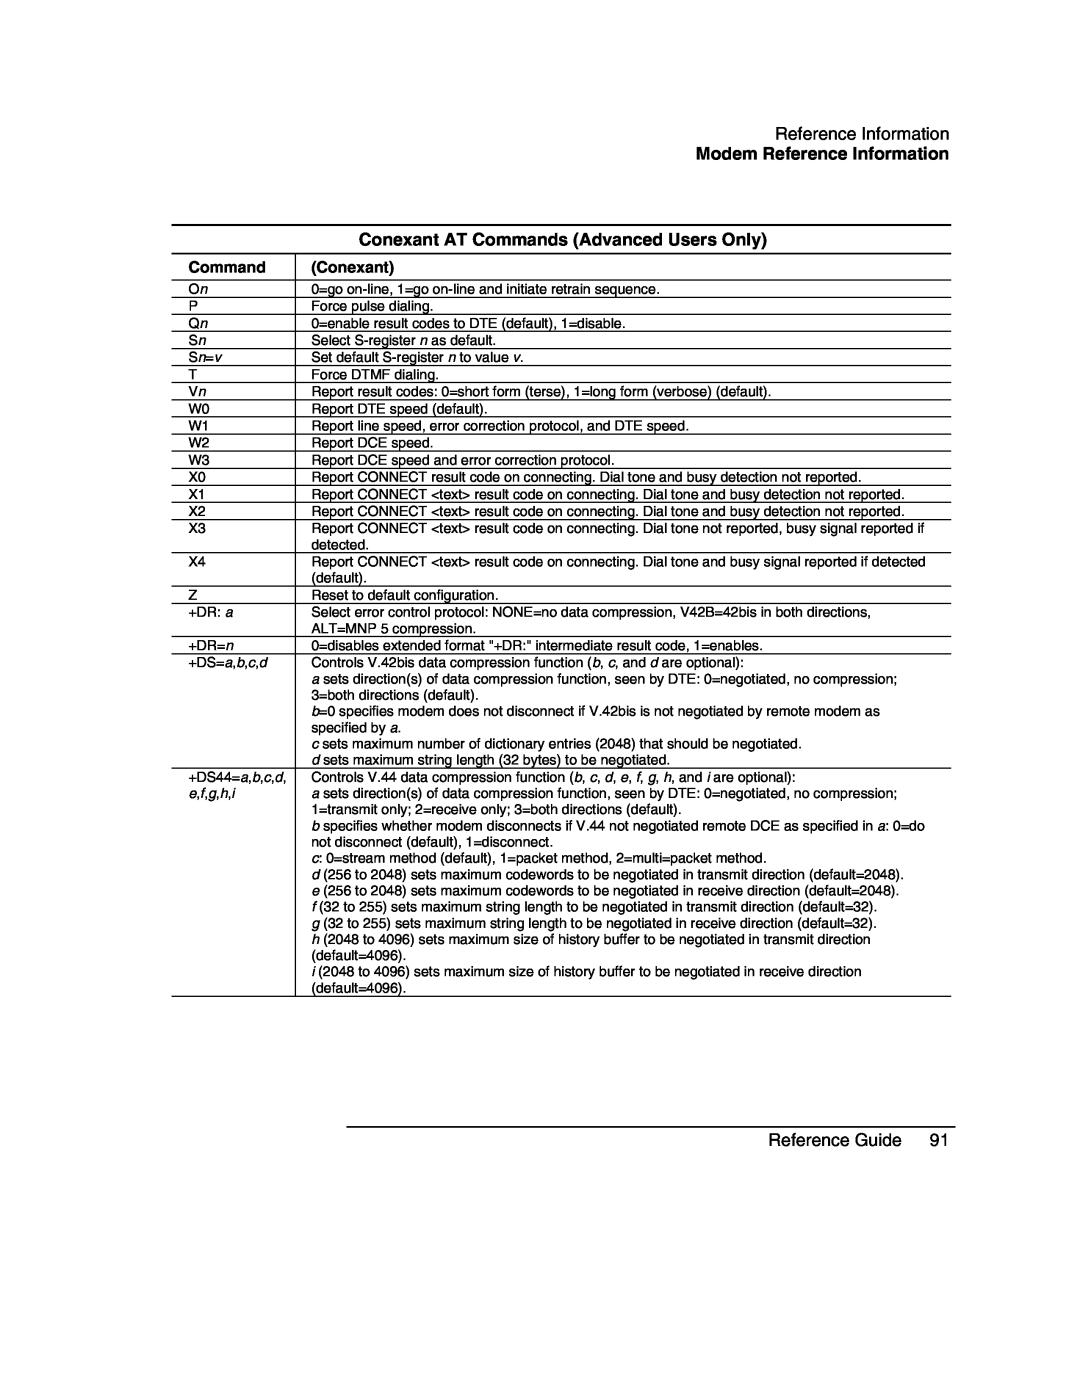 HP 2509, 2186AF Modem Reference Information, Conexant AT Commands Advanced Users Only, Reference Guide, e ,f ,g ,h ,i 